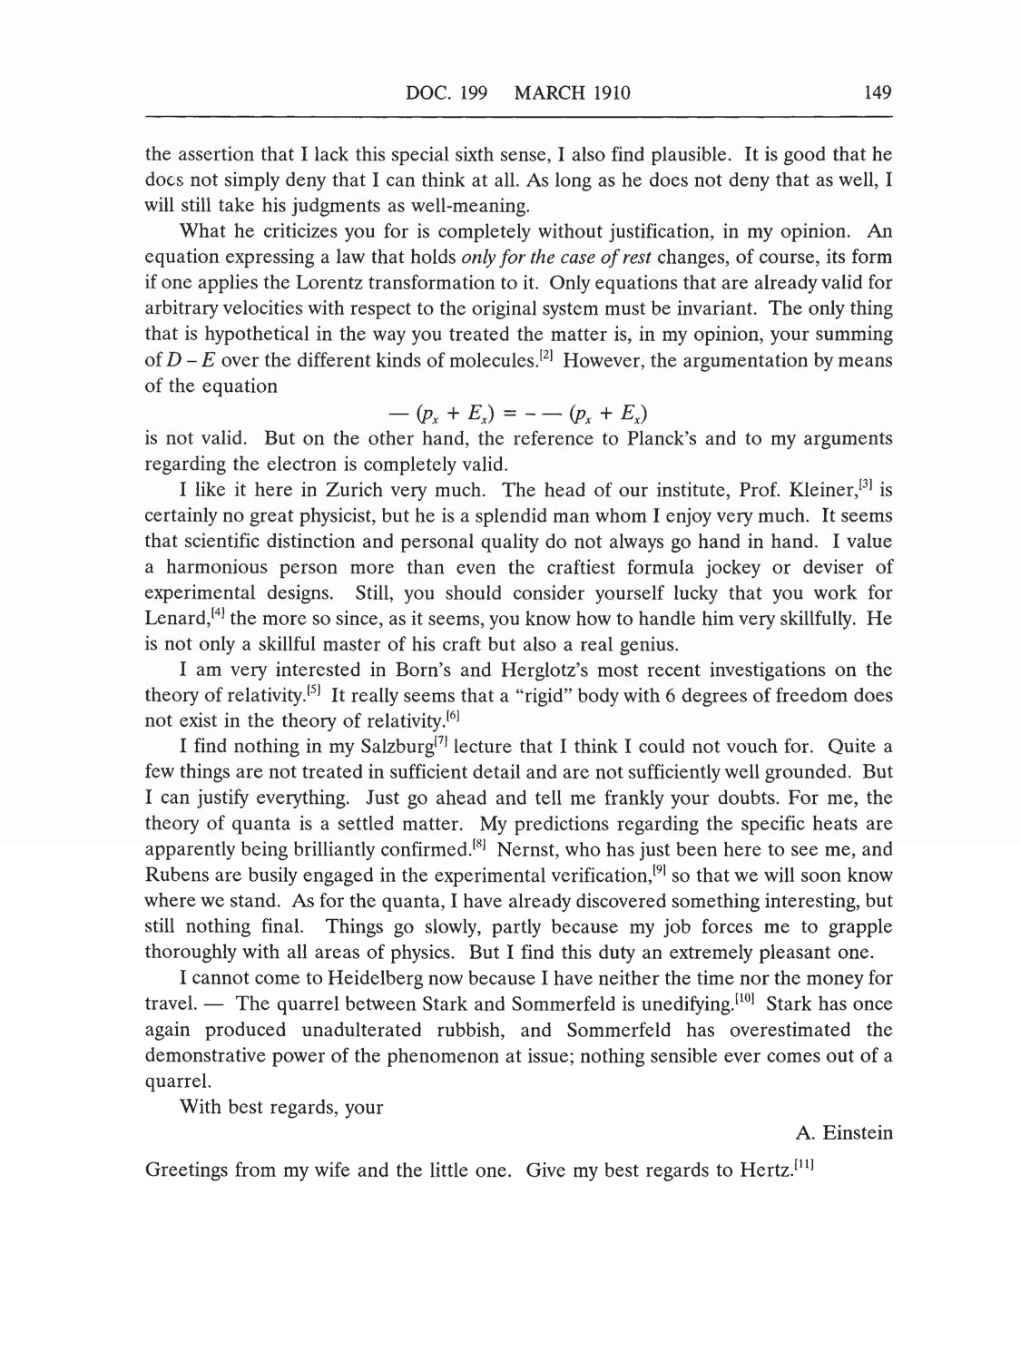 Volume 5: The Swiss Years: Correspondence, 1902-1914 (English translation supplement) page 149